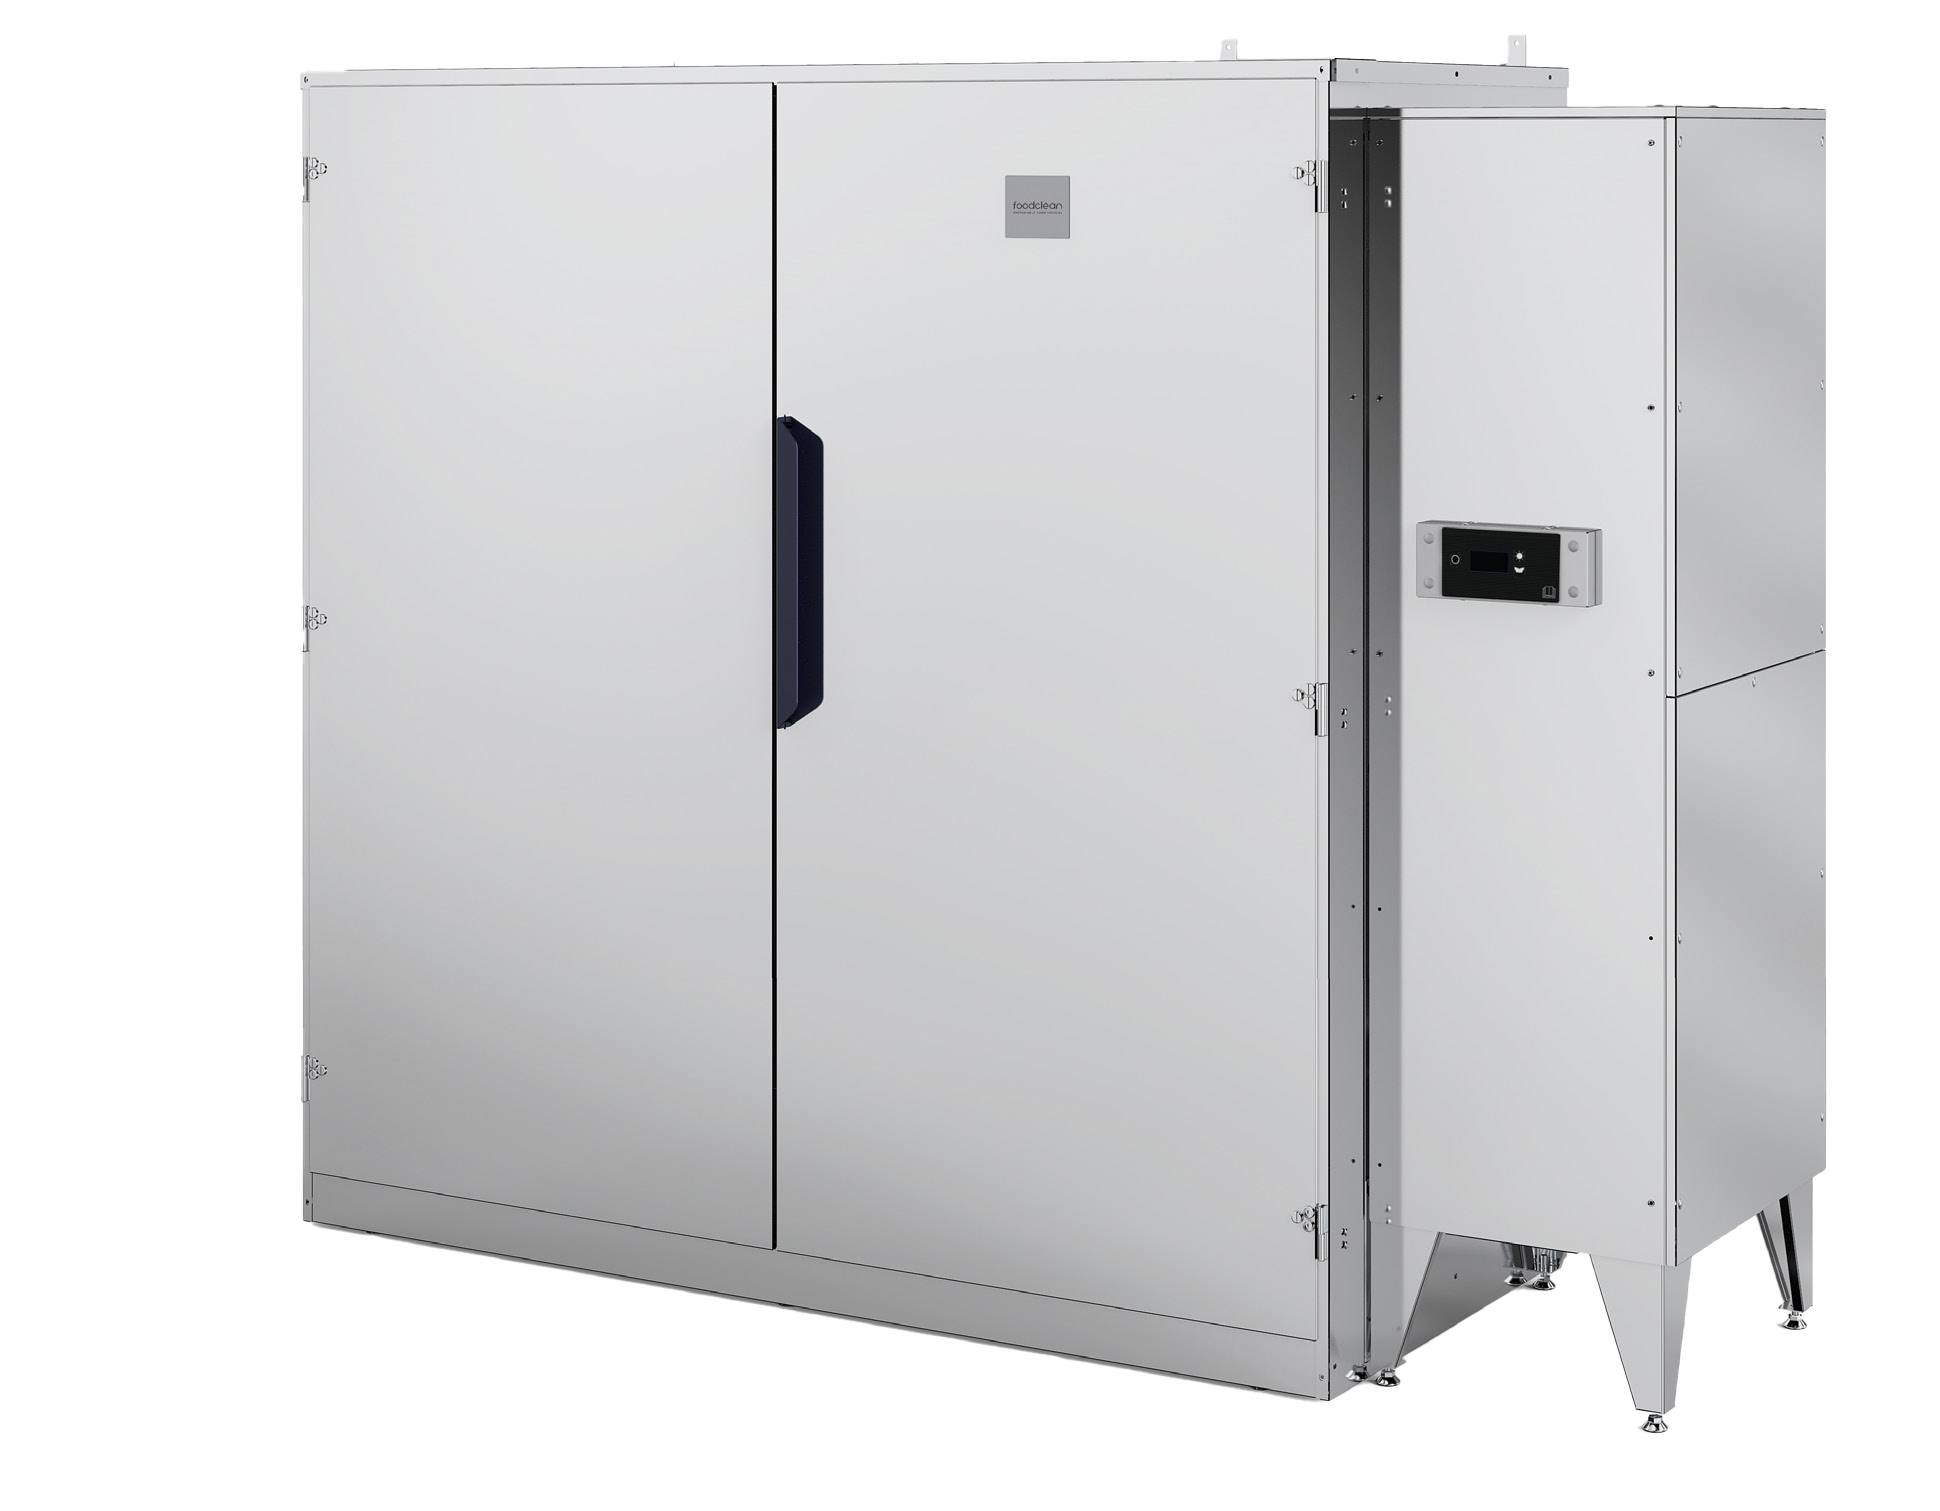 Supporting image for WashGuard Drying Cabinet 415v 10Kg Heat Pump Type